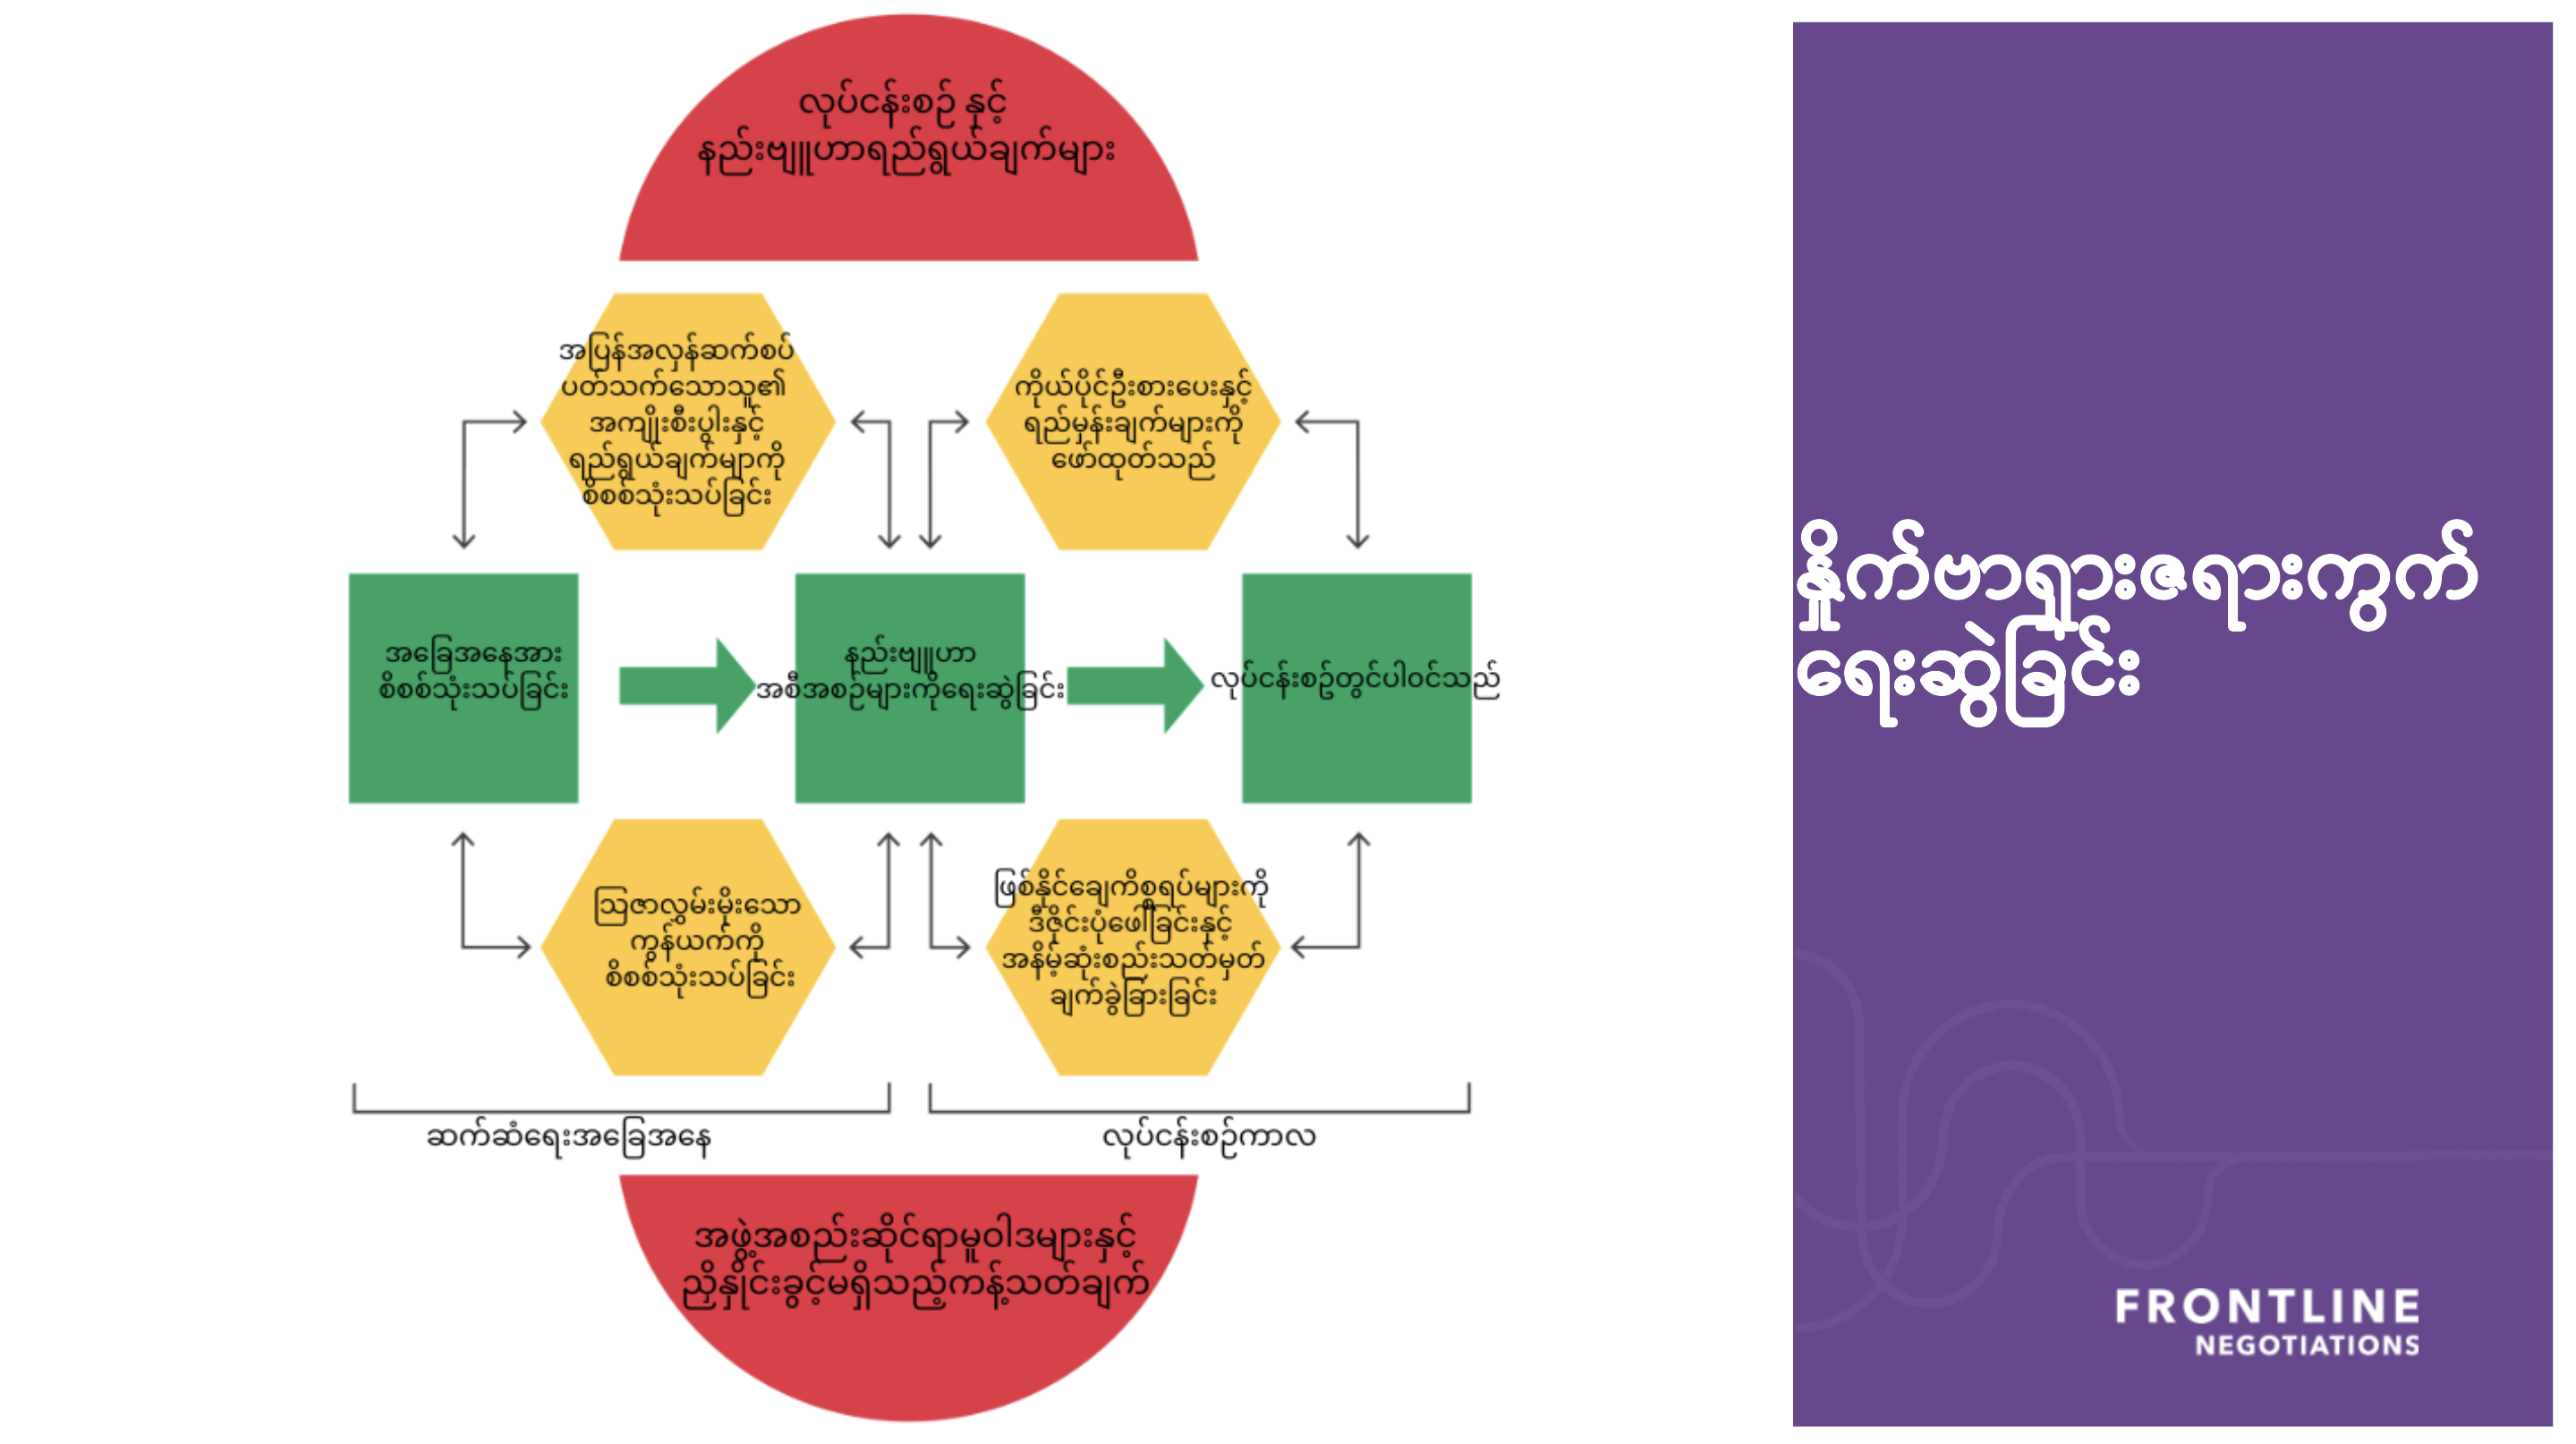 Humanitarians are helping their peers develop their negotiation skills by translating a diagram explaining the different phases of a negotiation process into Burmese.